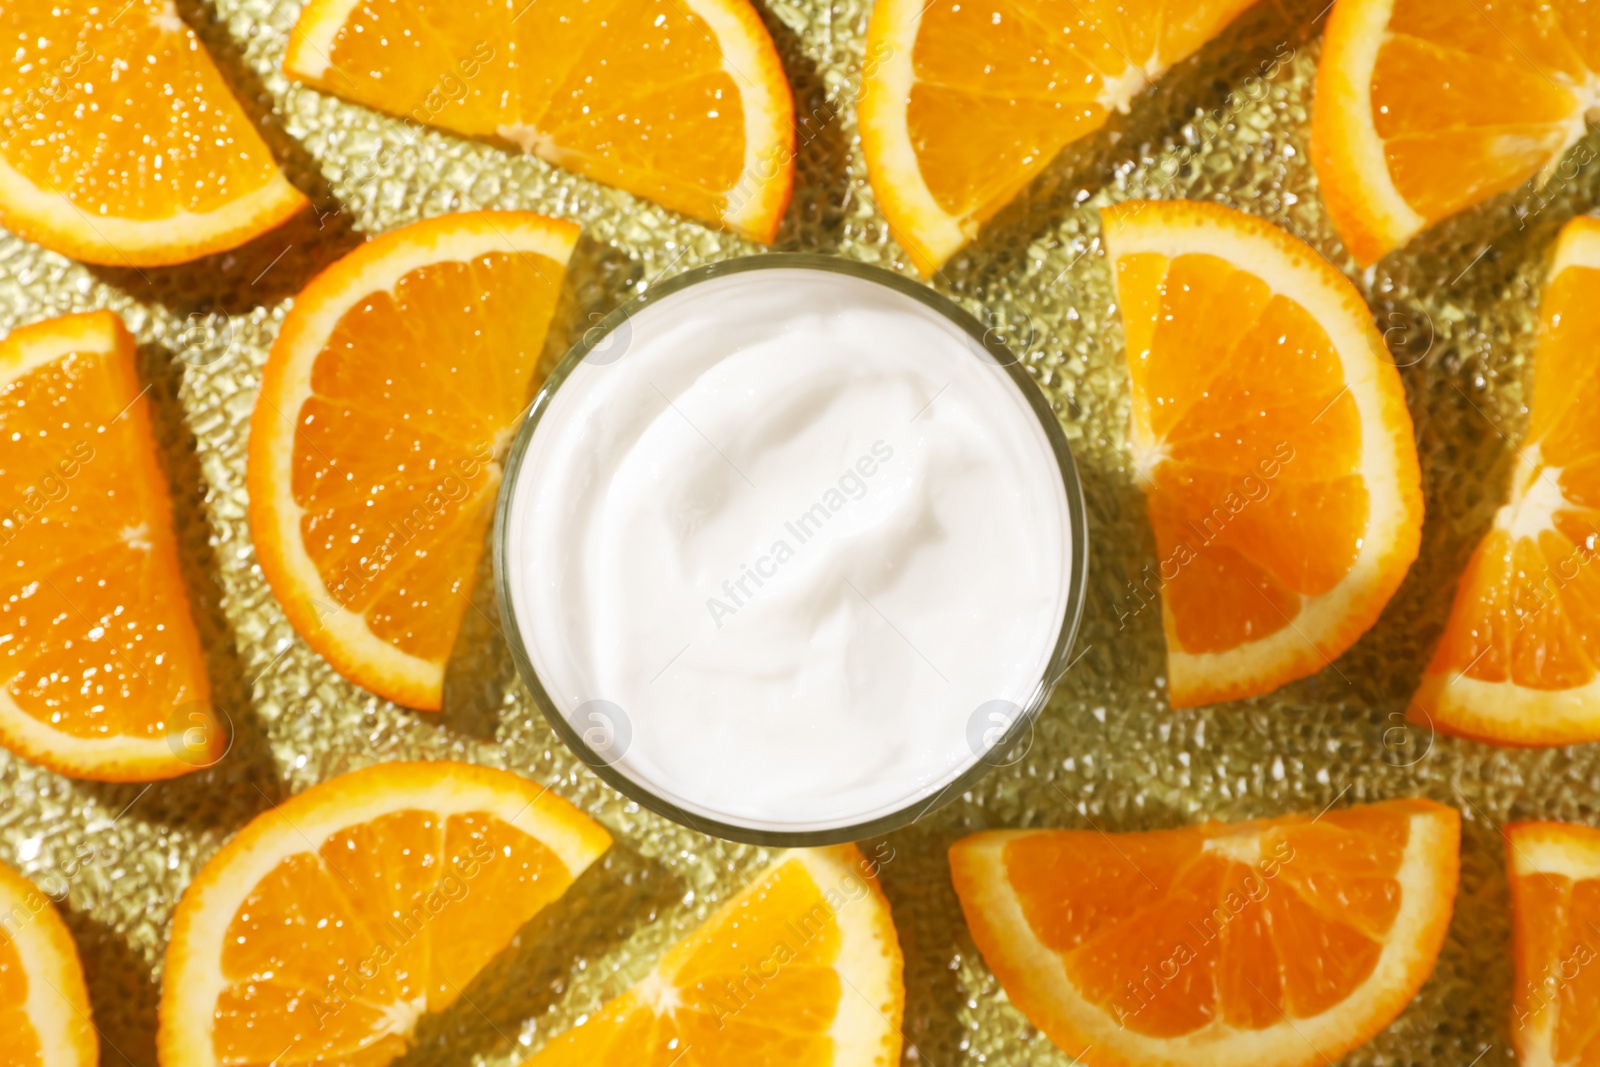 Photo of Jar of face cream surrounded by orange slices on golden textured surface, flat lay